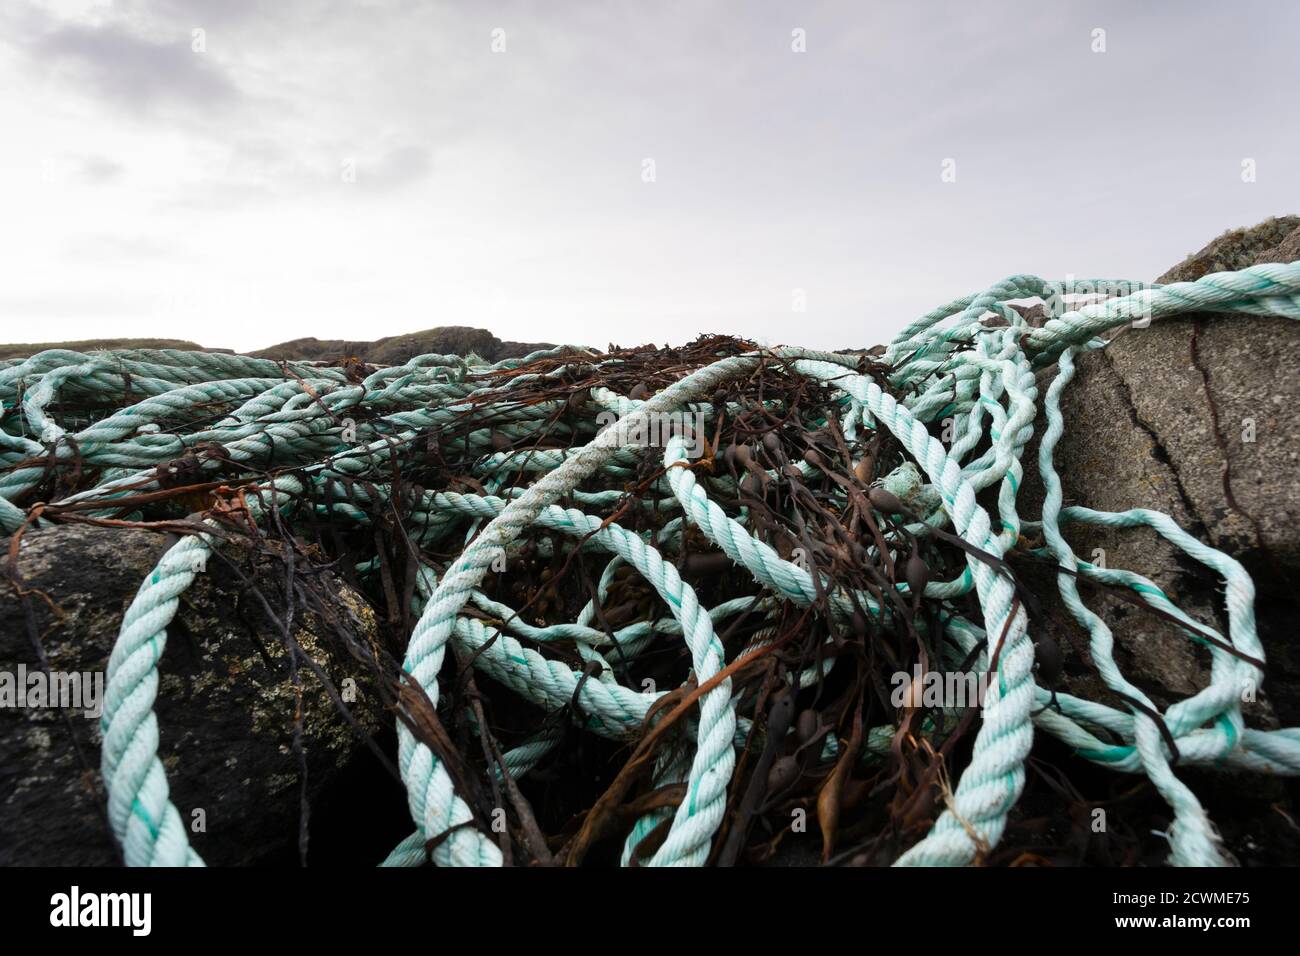 Debris from fishing industry washed up on rocks, nylon and plastic rope and netting is a major problem around all shorelines of the planet Stock Photo